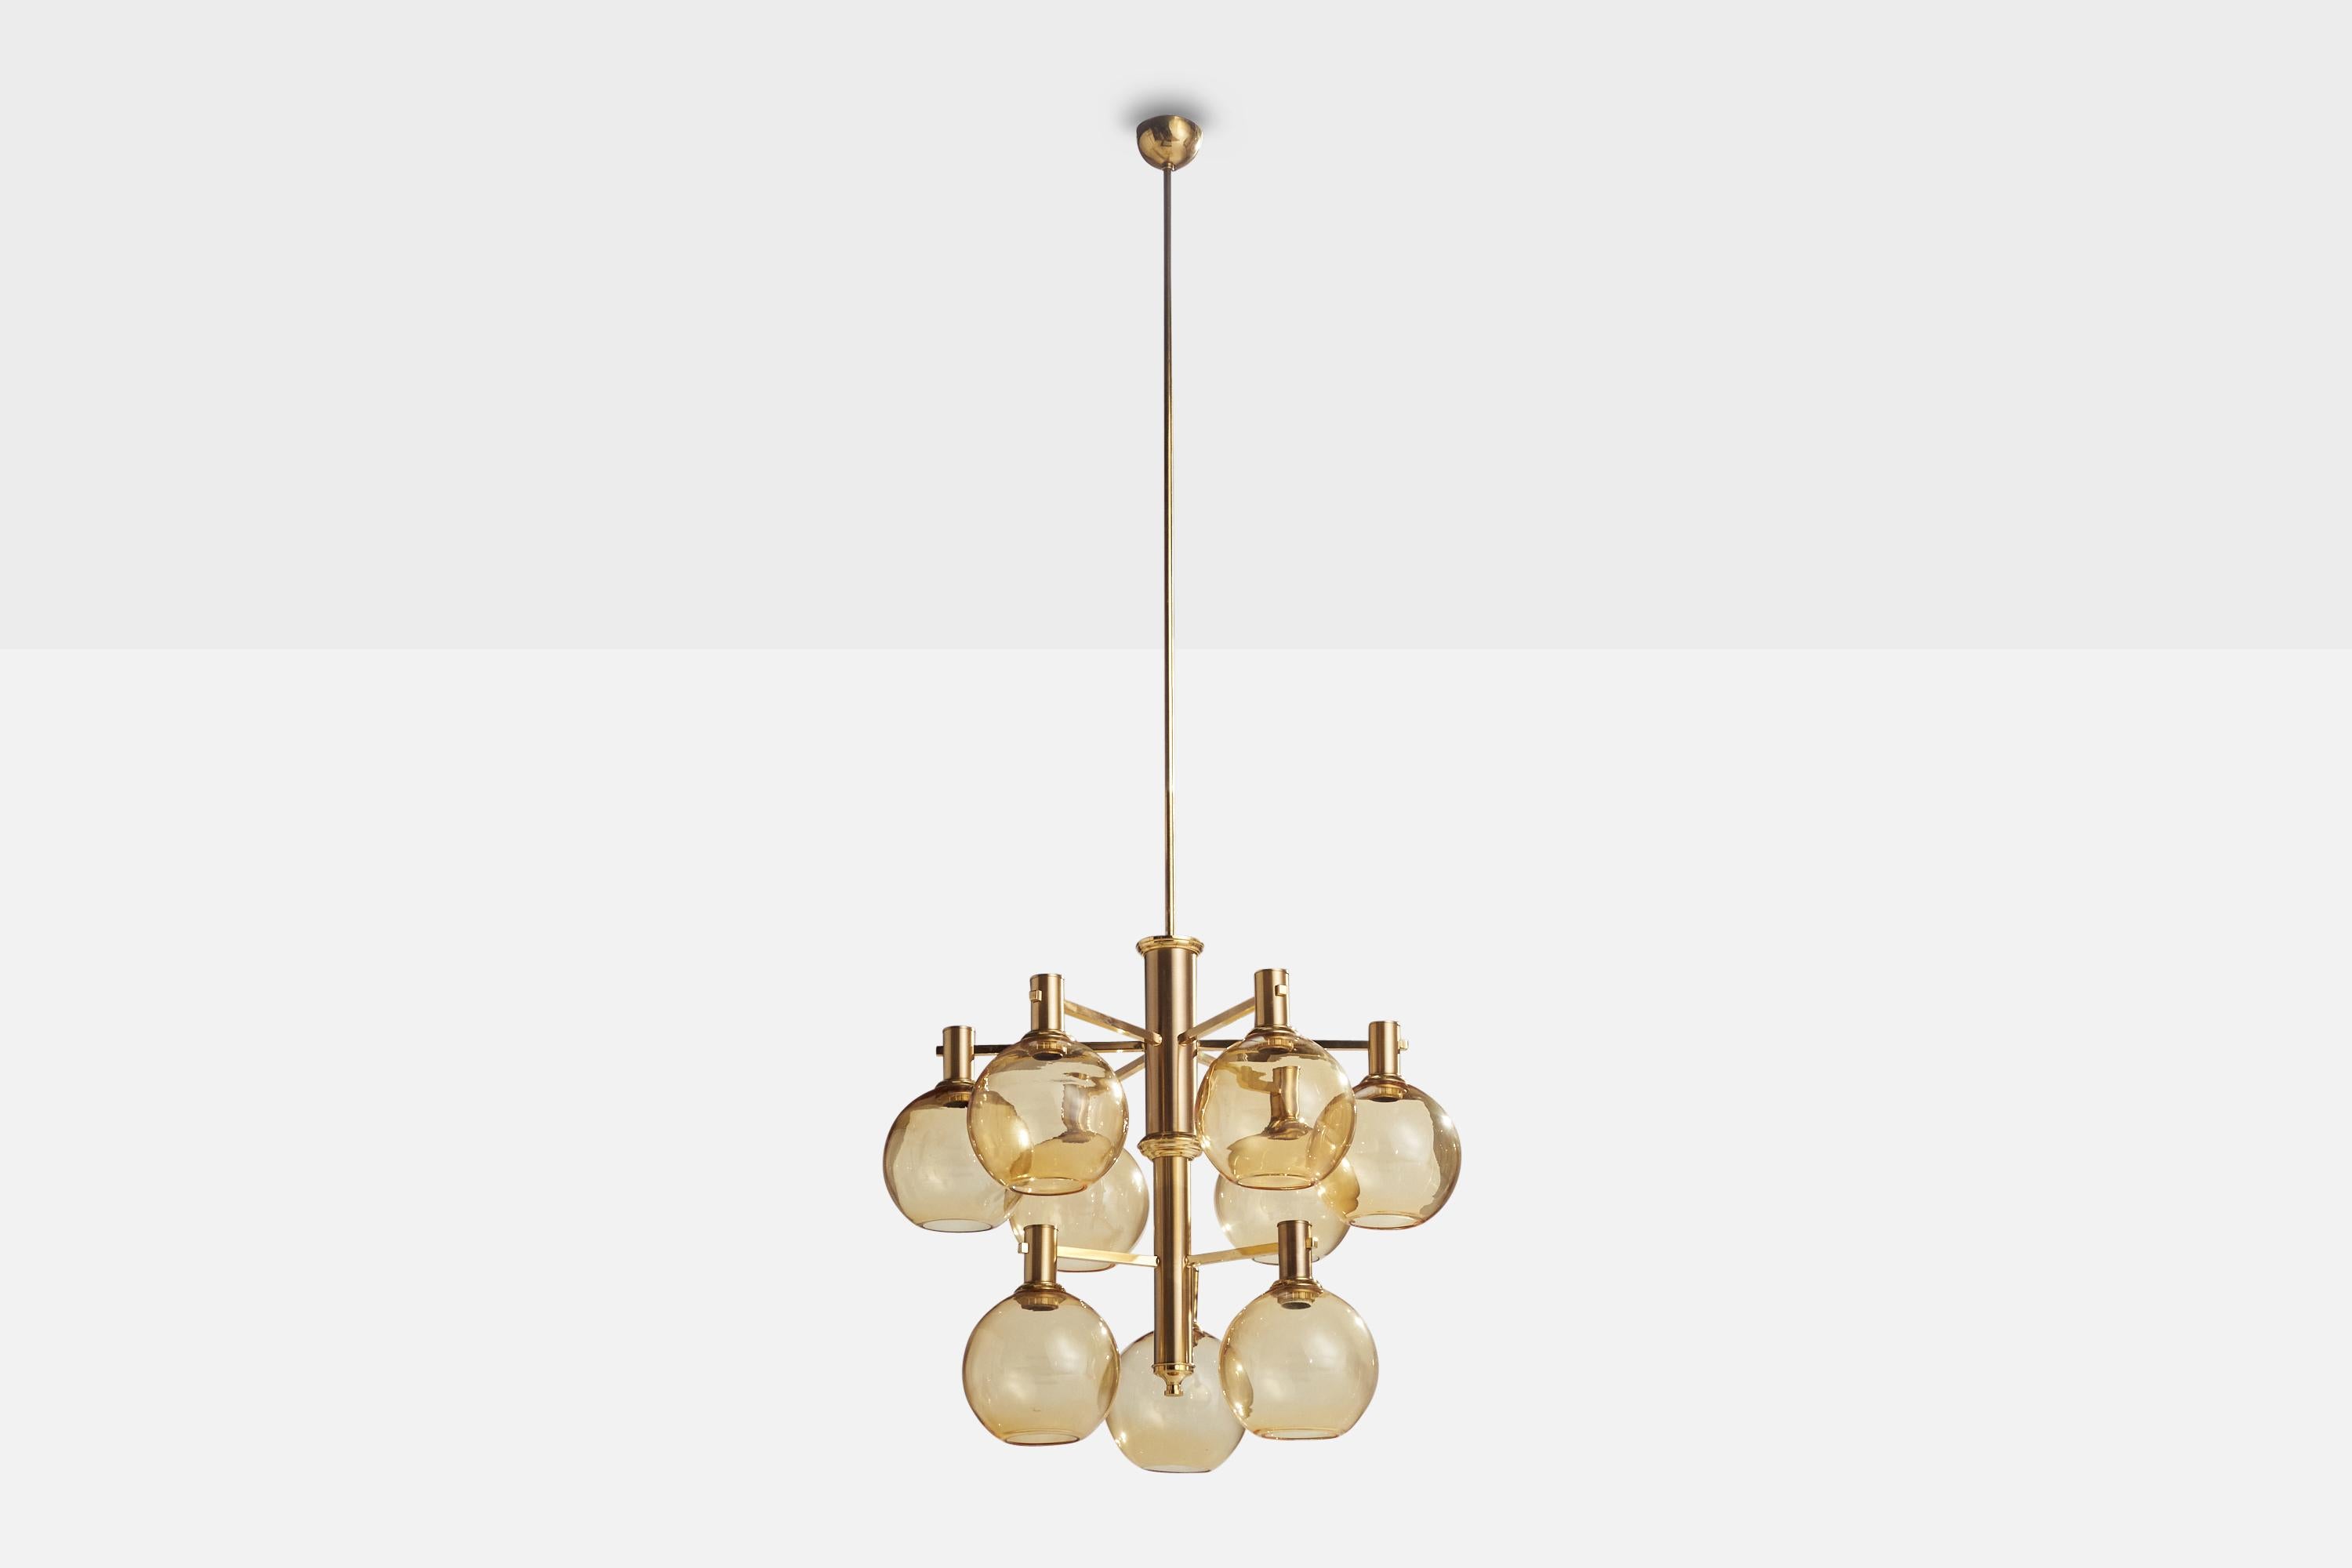 A sizeable brass and blown yellow glass chandelier designed by Erik Wärnå and produced by EWÅ Värnamo, Sweden, 1960s.

Dimensions of canopy (inches): 3.25” H x 4.25Diameter
Socket takes standard E-26 bulbs. 9 sockets.There is no maximum wattage